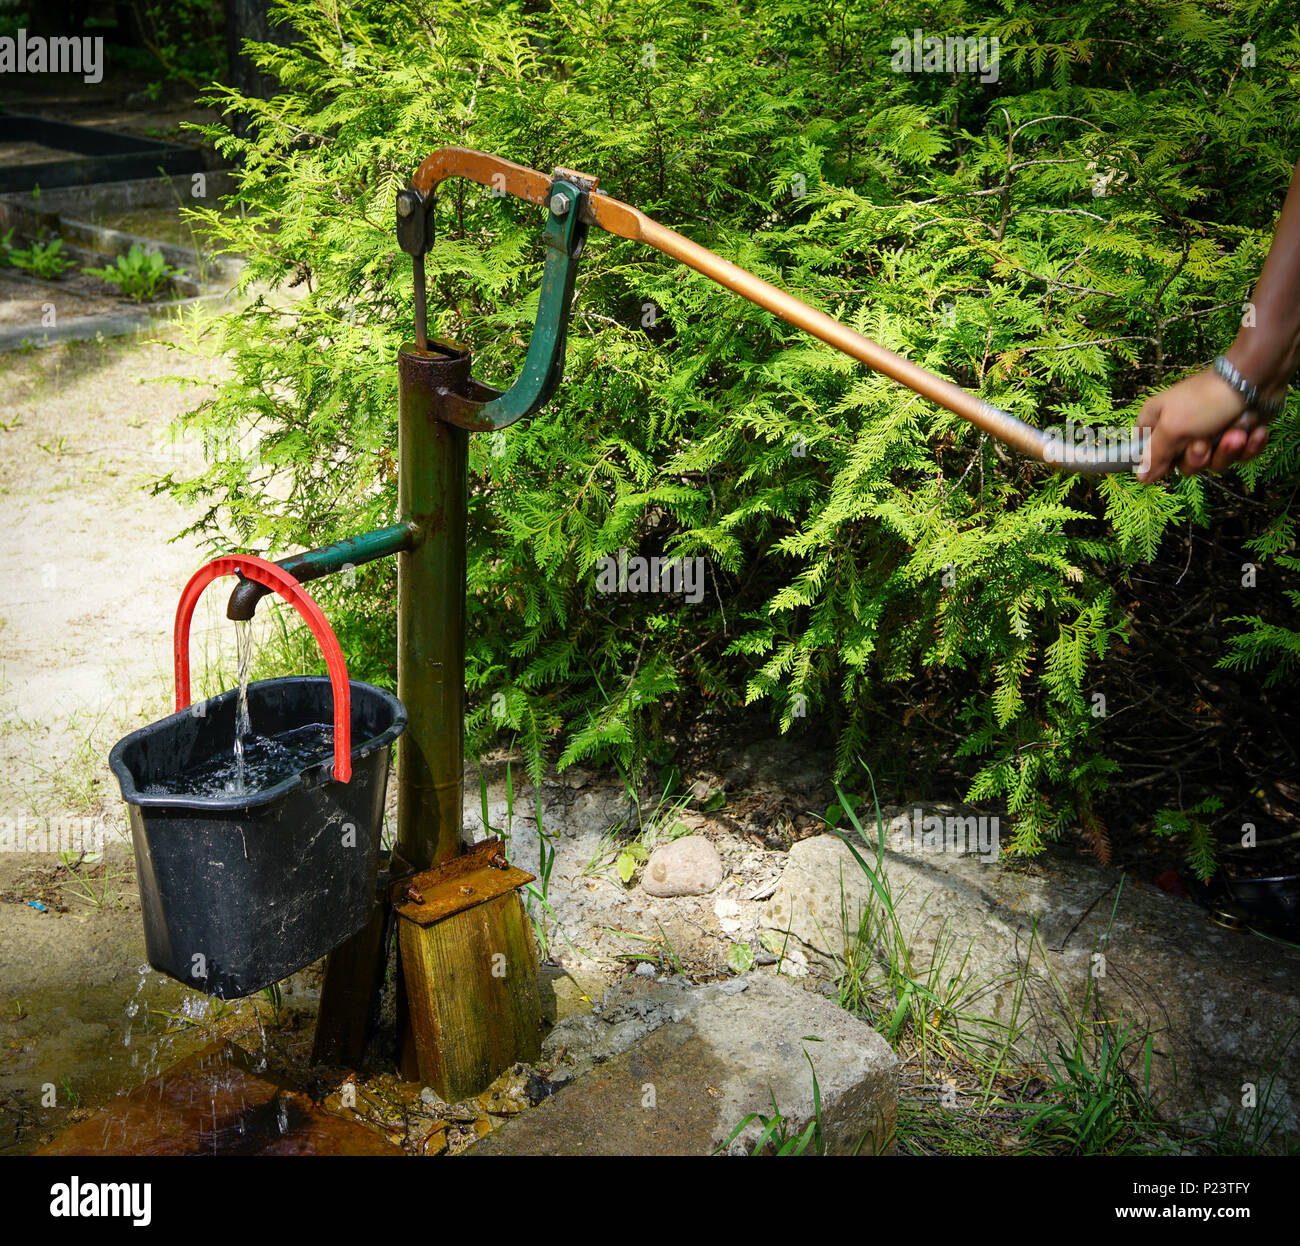 Hand Operated Water Pump Stock Photo Alamy